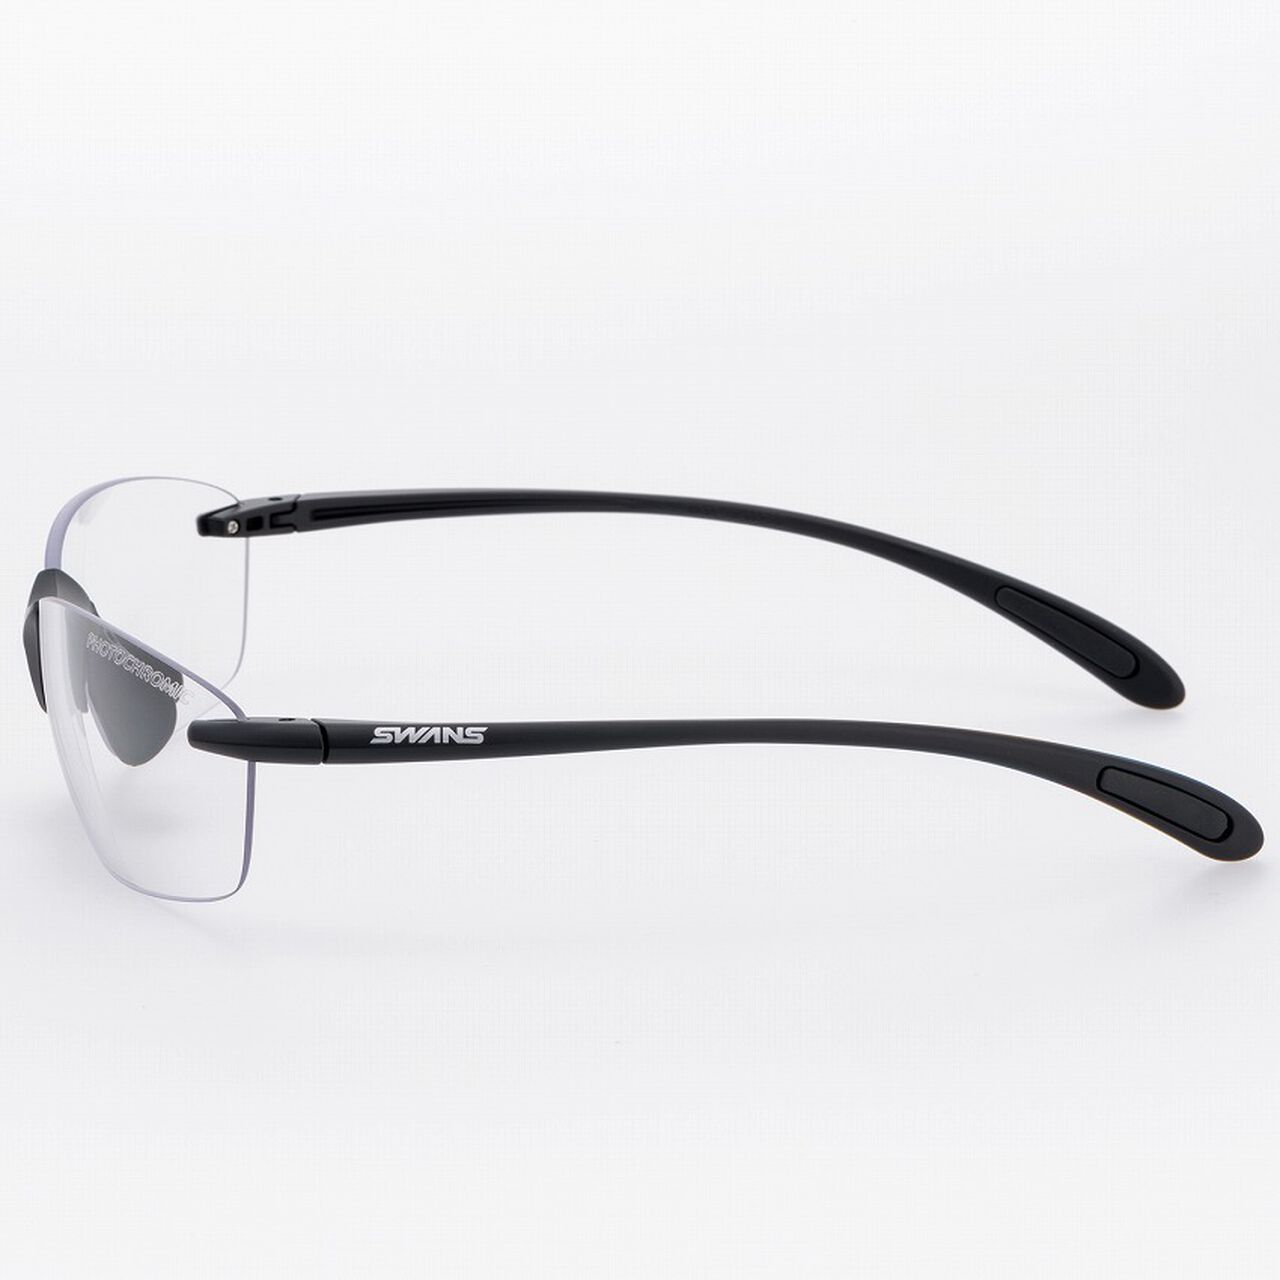 SA-Fit AMZ-SALF-0066 MBK Photochromic Clear to Smoke,Opt13, large image number 2